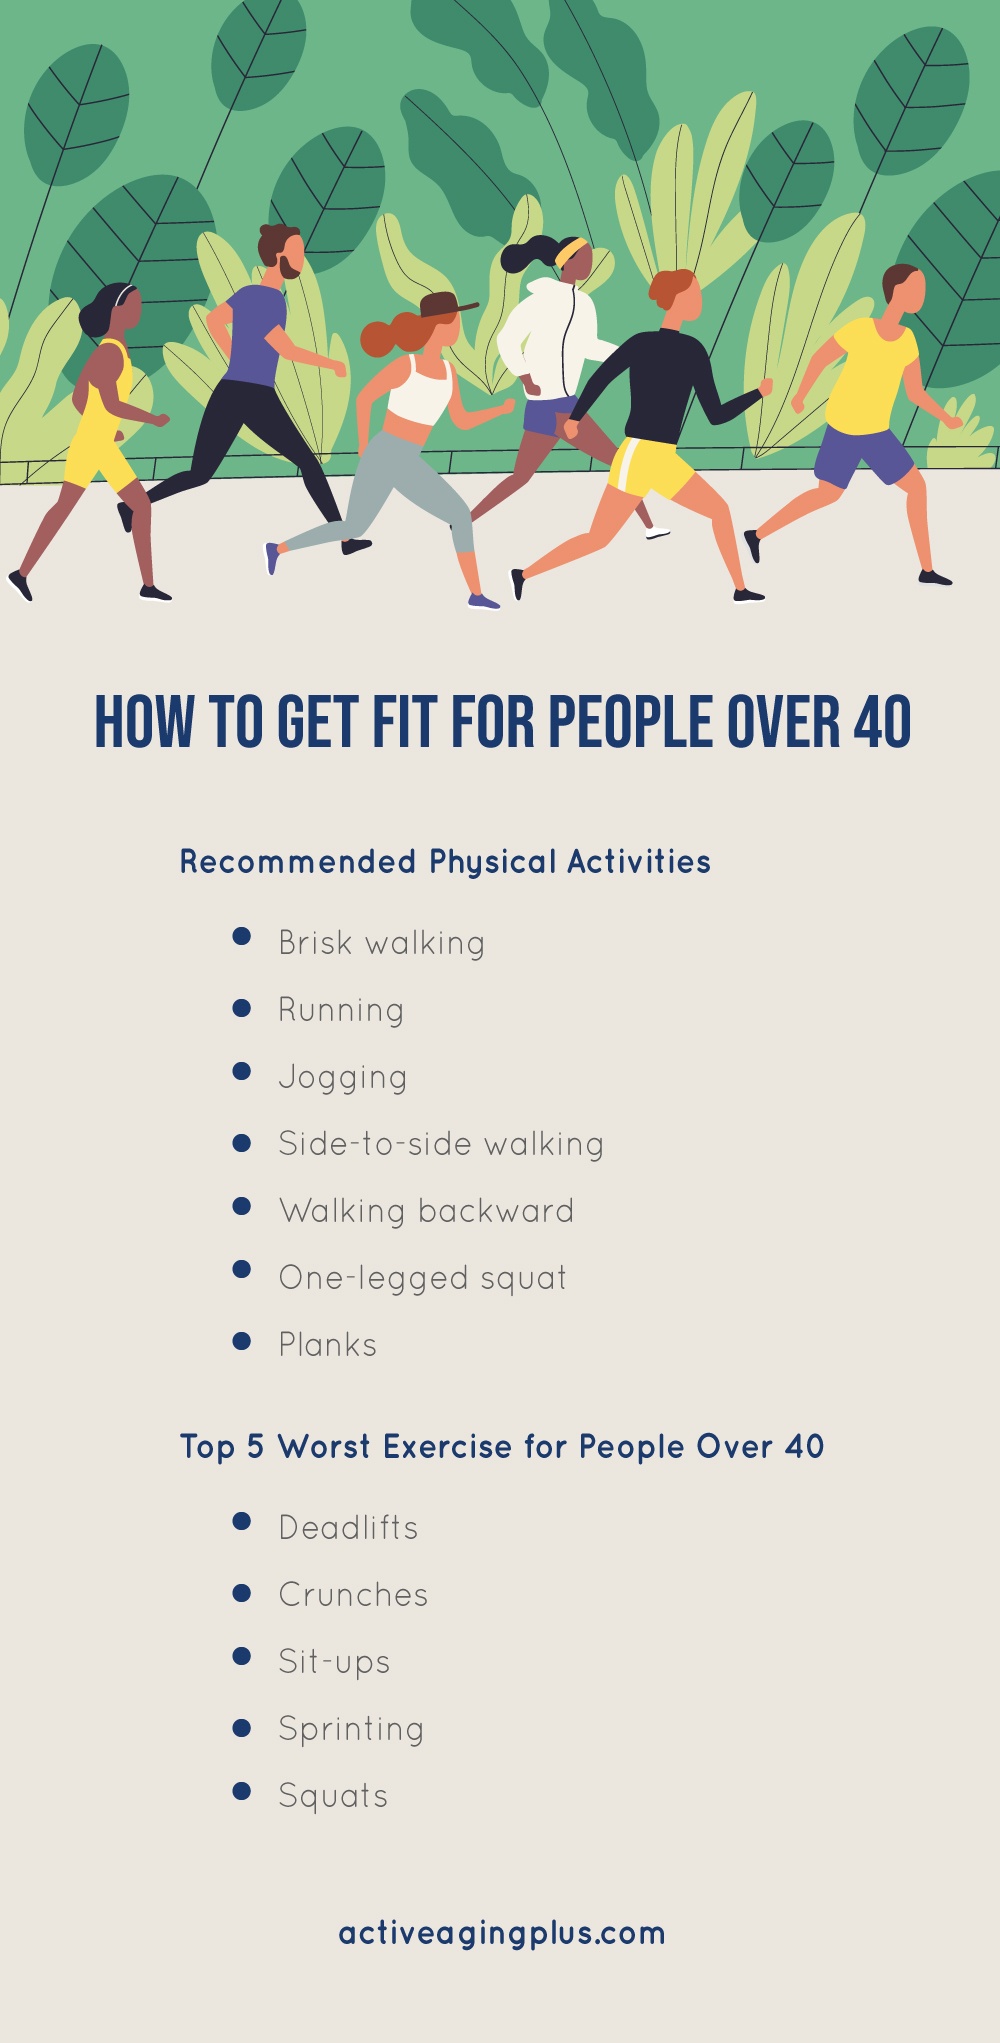 How to get fit for people over 40